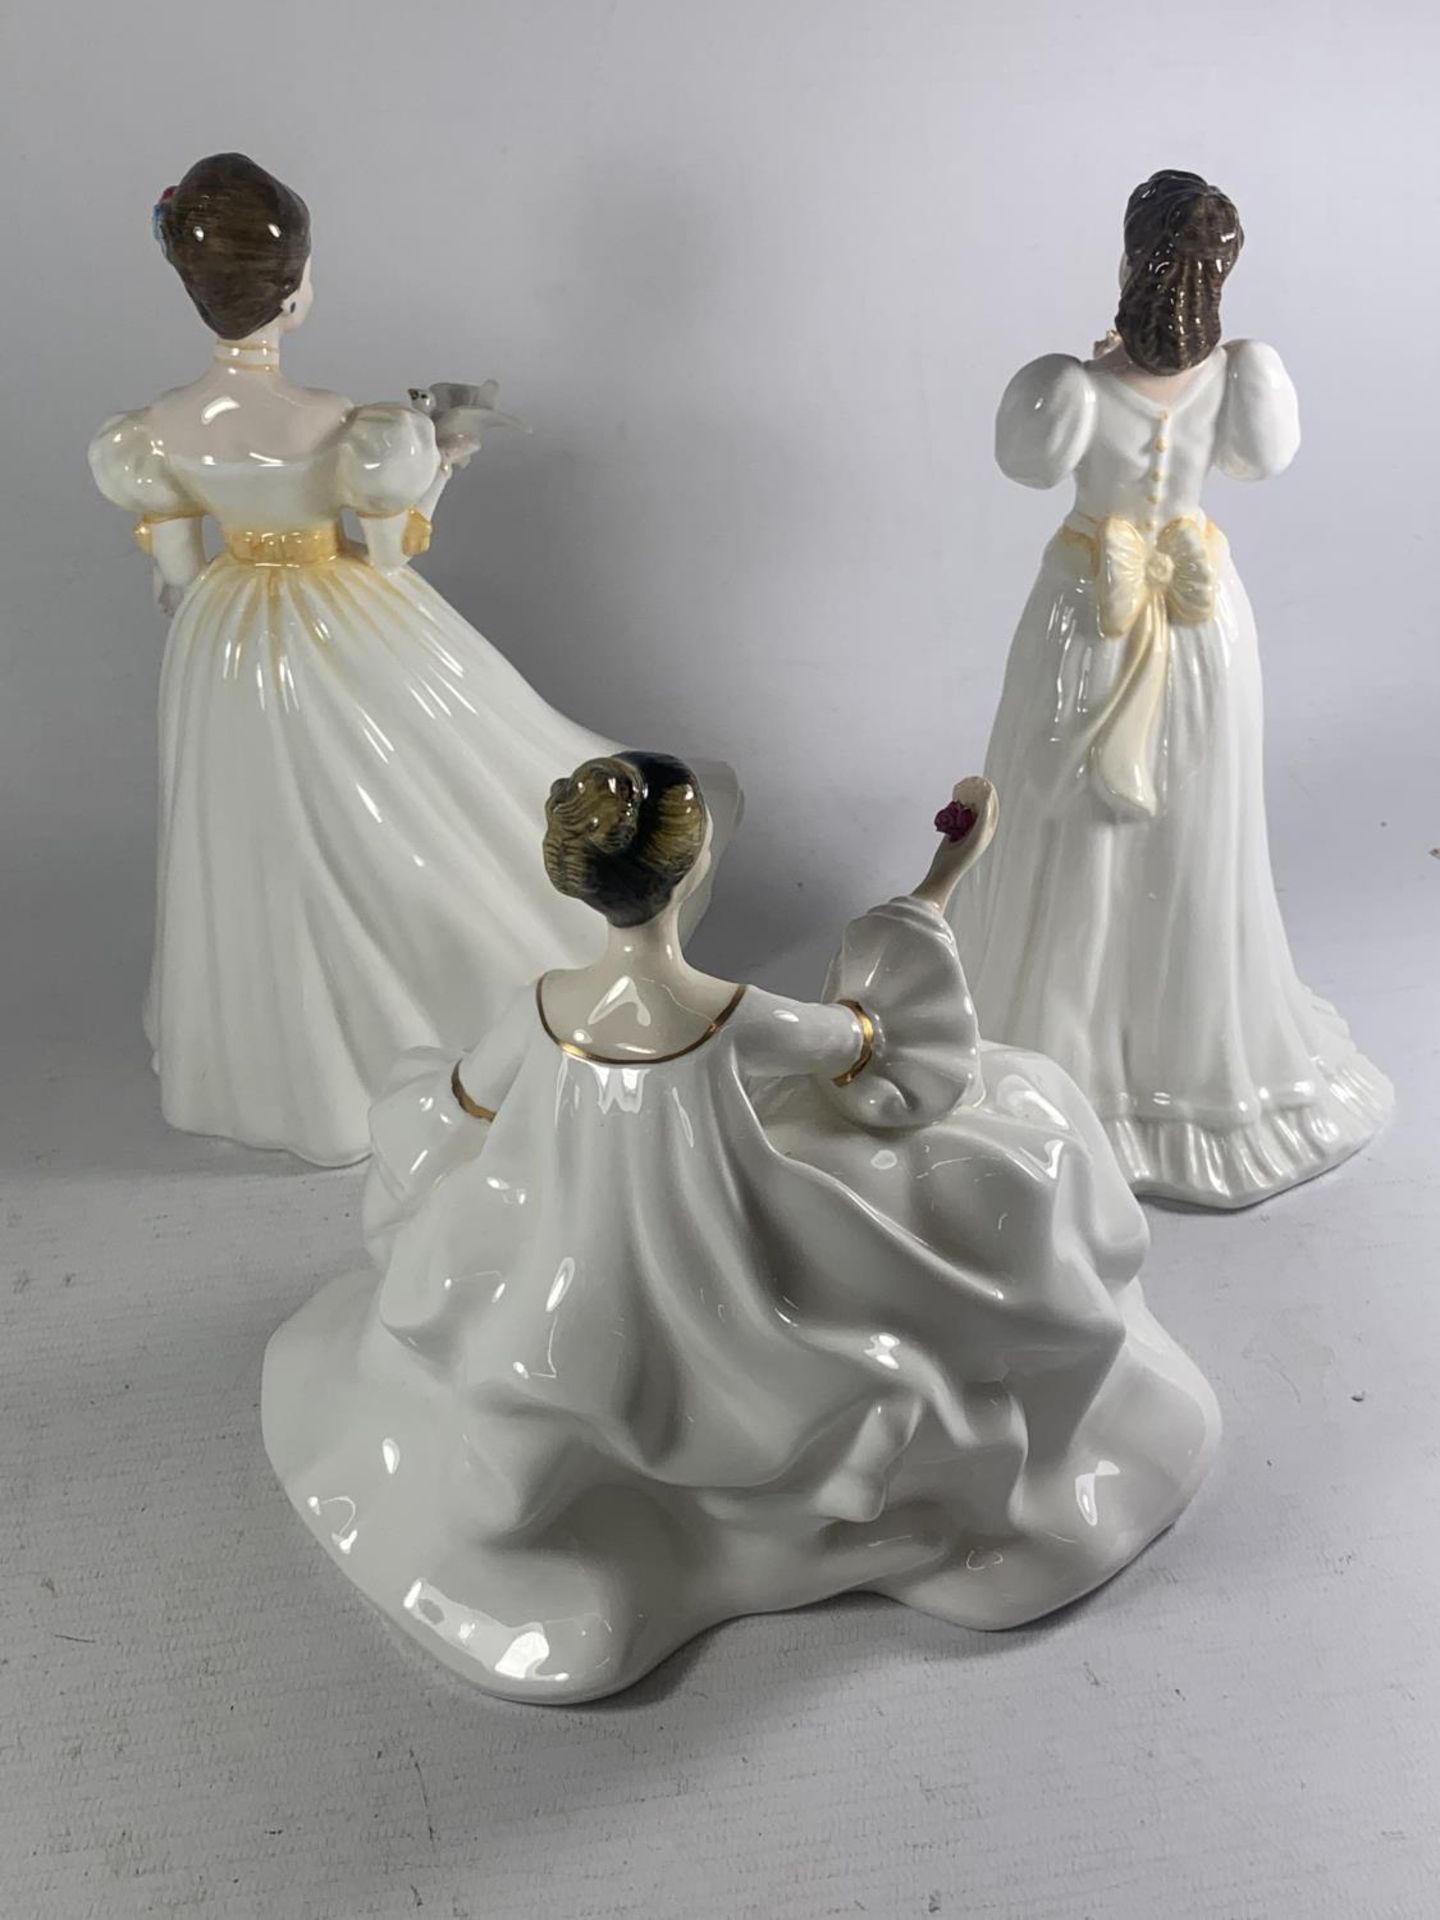 THREE ROYAL DOULTON FIGURES MY LOVE, MARIA AND KATHLEEN - Image 5 of 6